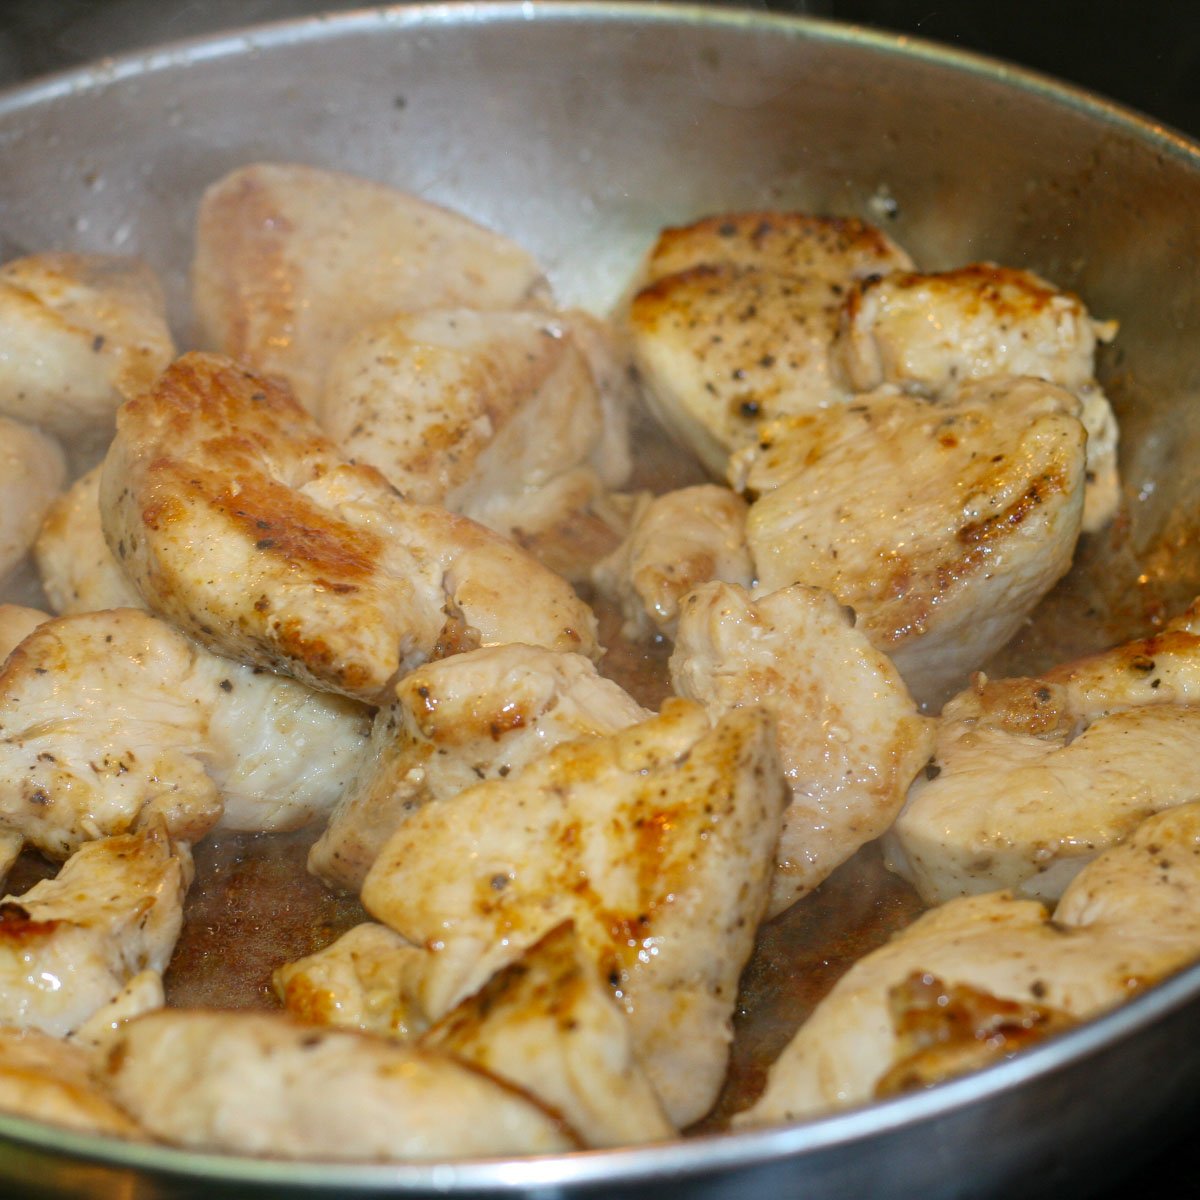 Chopped chicken frying in stainless steel frying pan.